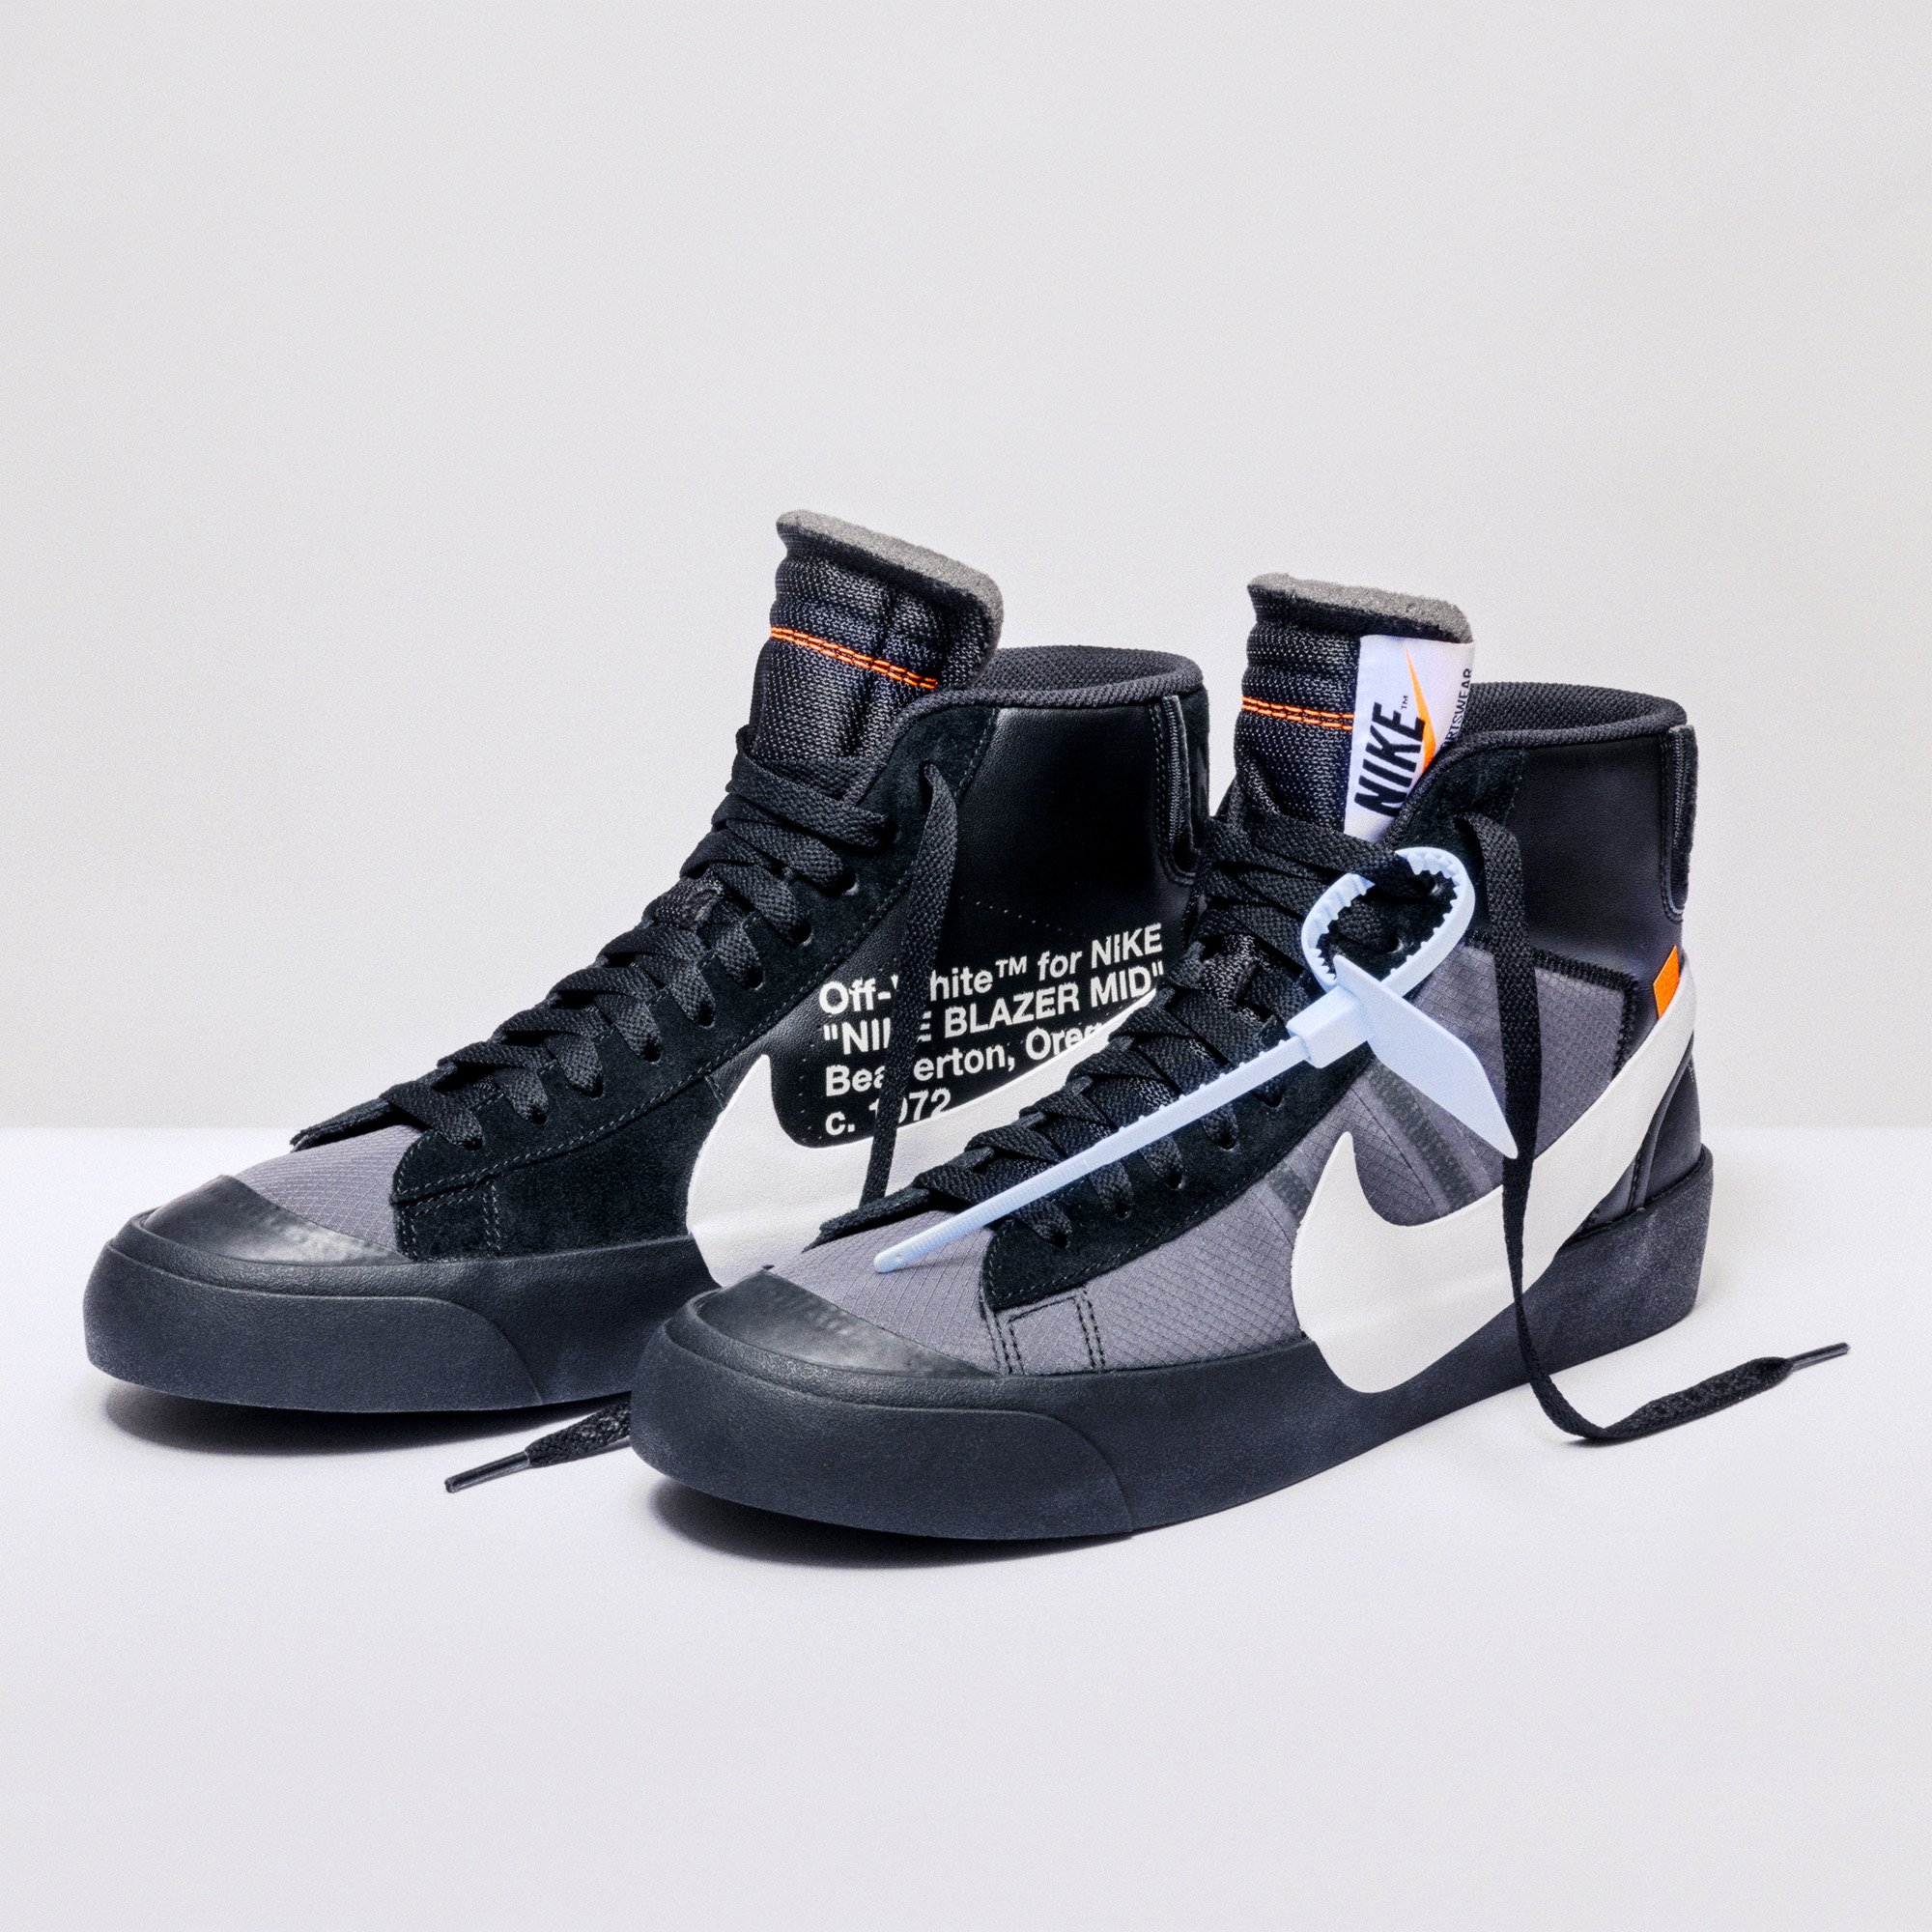 Dempsey tempo Lege med Naked Copenhagen on Twitter: "The OFF-WHITE x Nike Blazer Mid “All Hallows  Eve” and “Grim Reaper” is coming soon to https://t.co/FsRUf2FThy. The only  thing spooky about this upcoming release is the idea